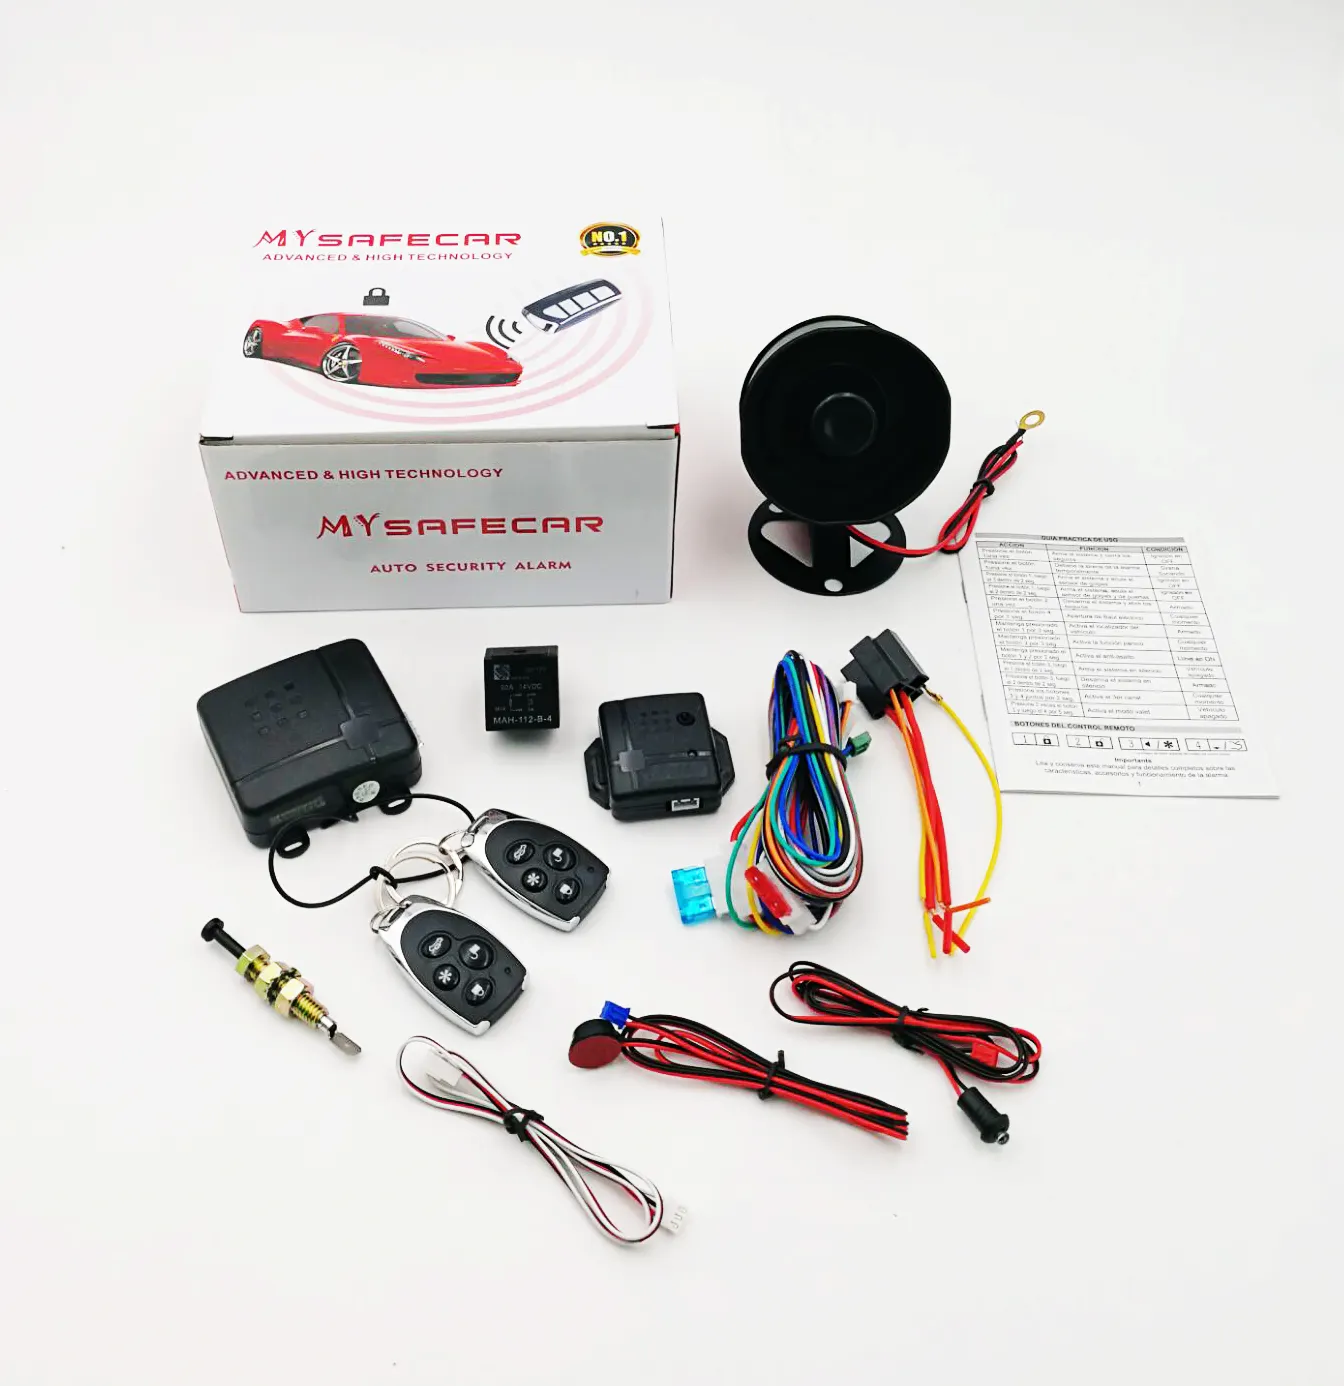 DALOS Anti-hijacking one way alarm with shock sensor remote trunk release customized box and logo for car alarm system